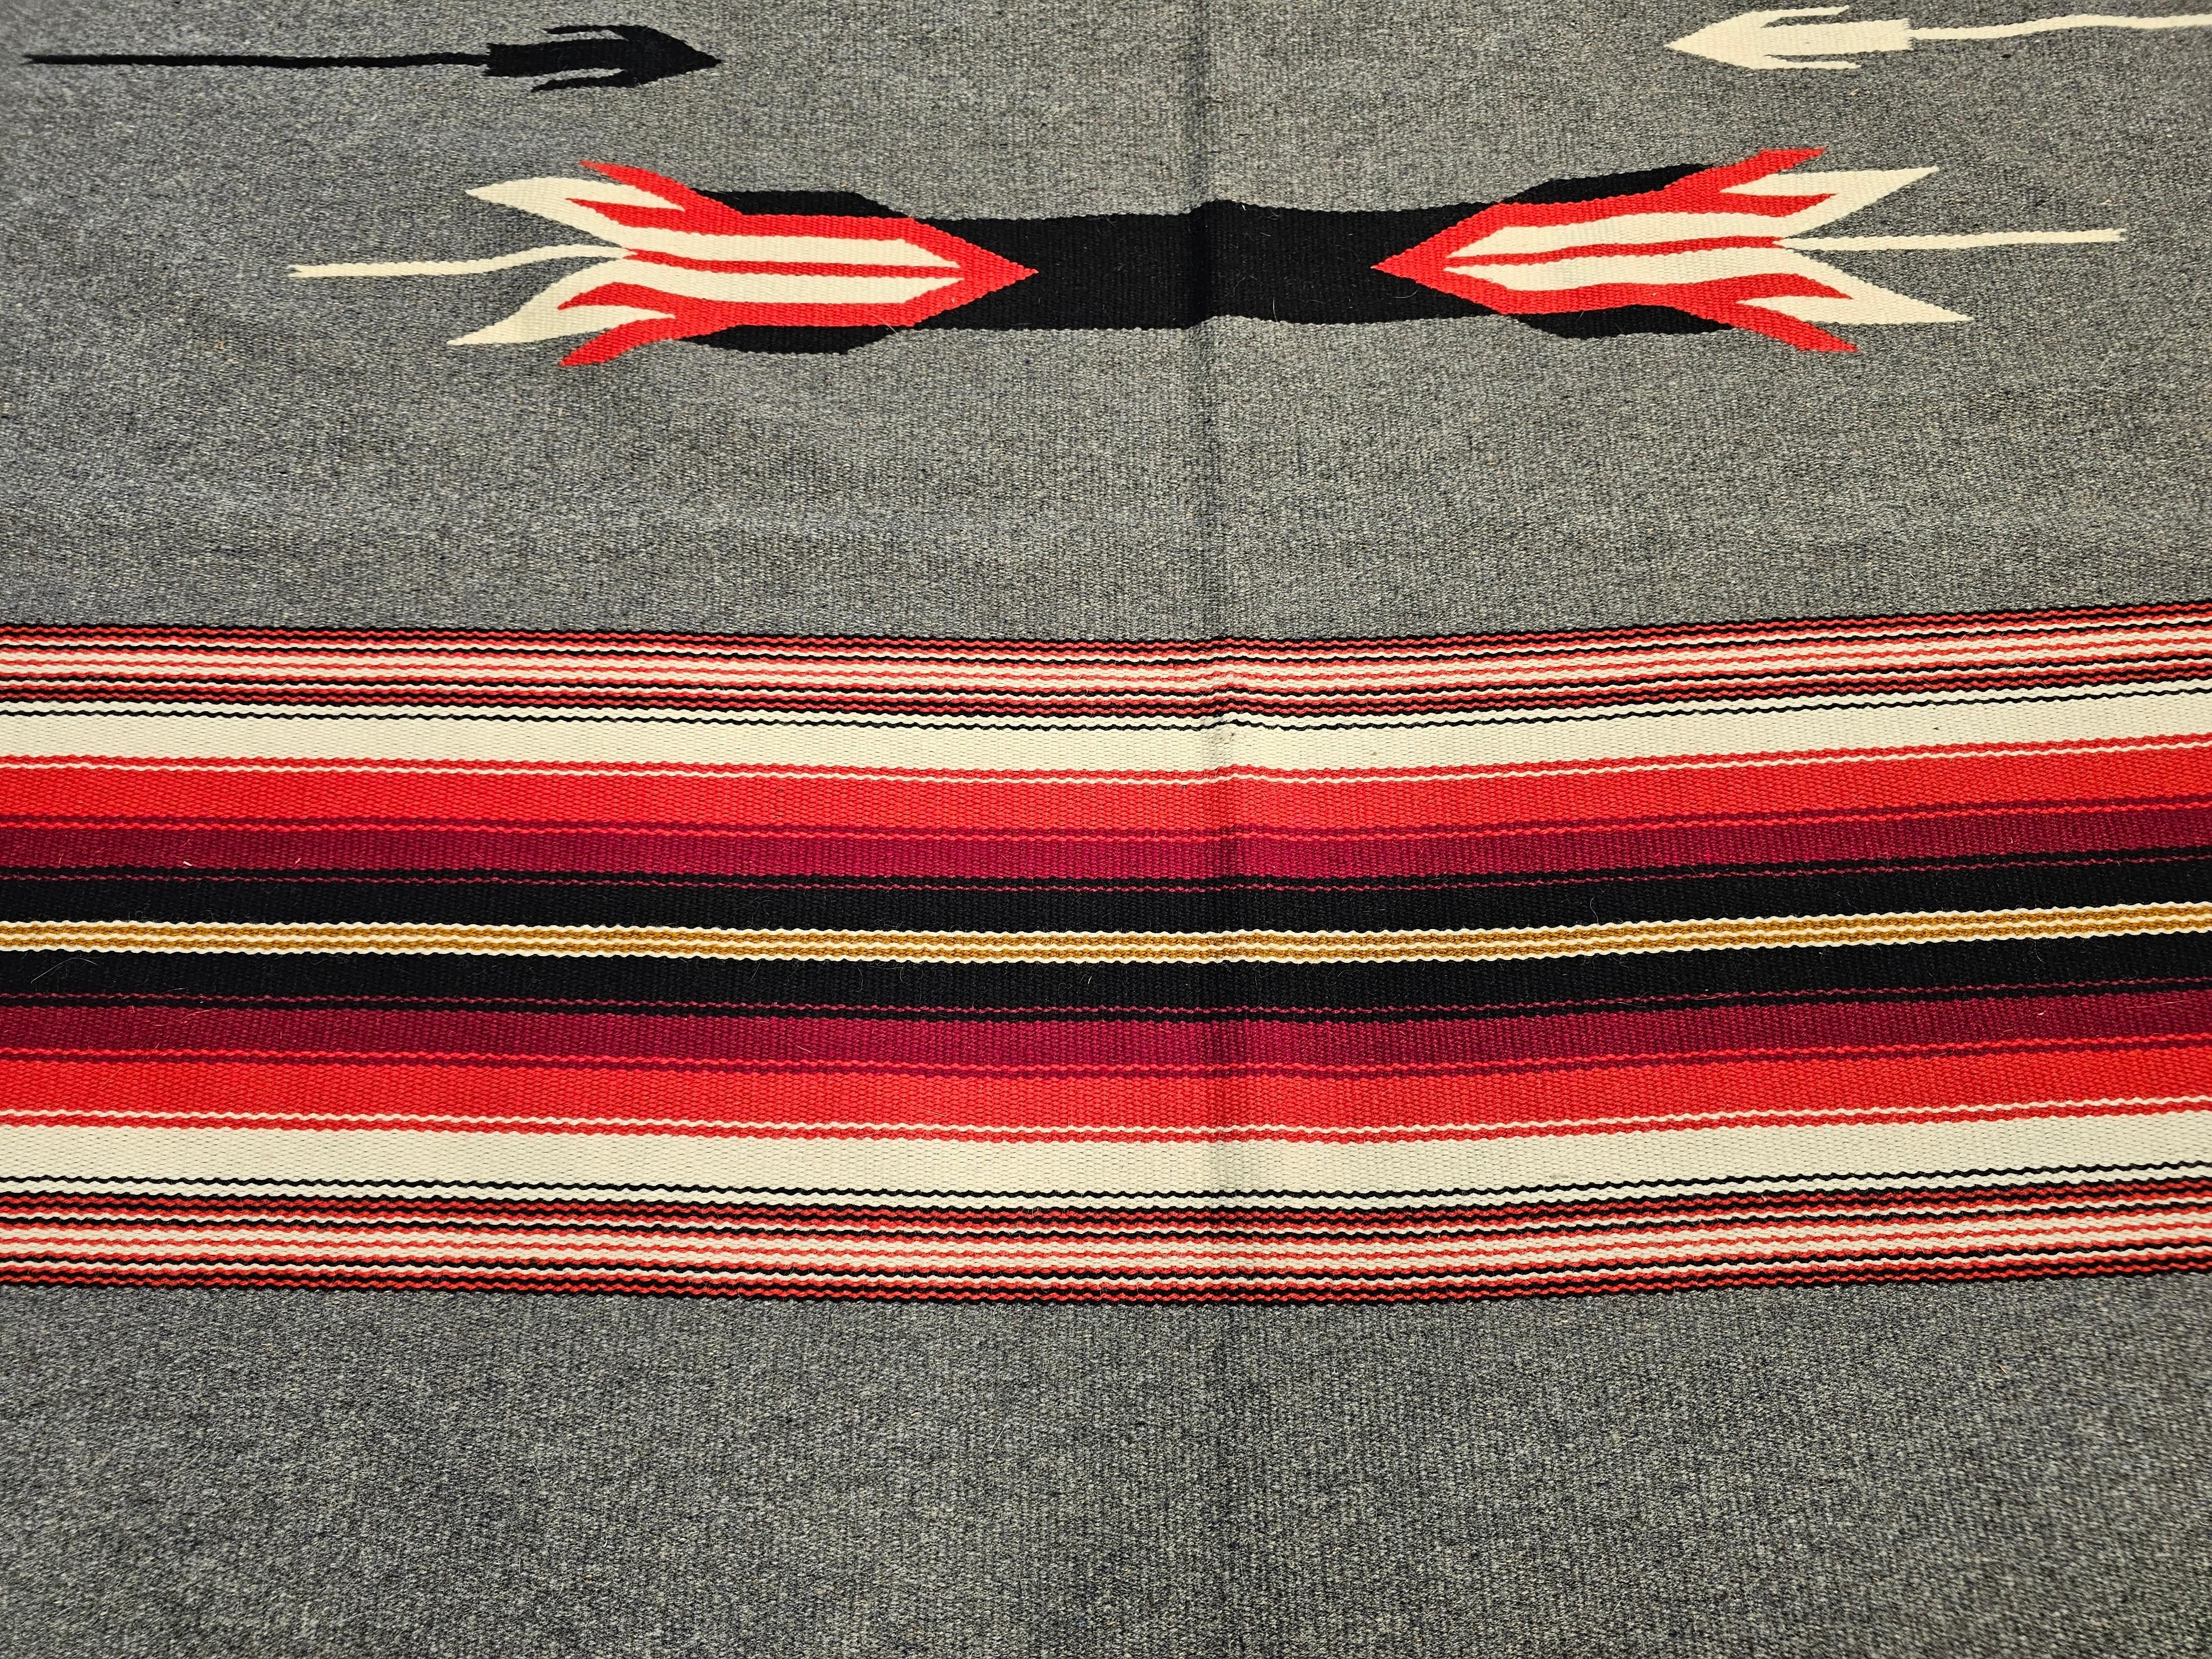 Southwestern Kilim in Stripe Pattern in Pale Blue, Ivory, Red, Black, Brown In Excellent Condition For Sale In Barrington, IL